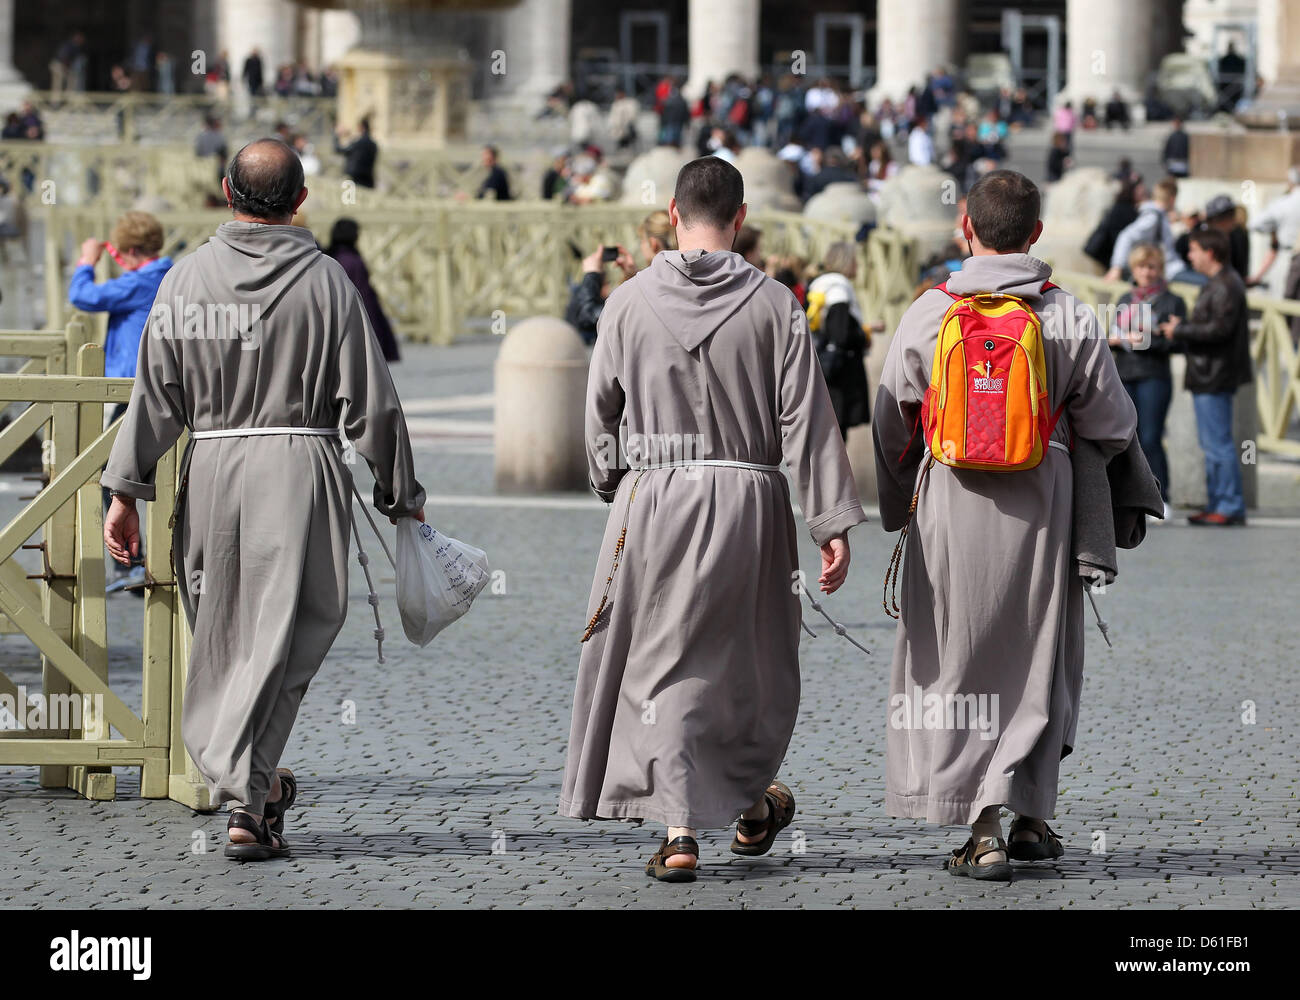 Pilgrims walks across the St. Peter's Square in Rome, Germany, 19 April 2012. A mix of sun and rain with temperatures around 17 degrees Celsius are expected in the Italian capital city. Photo: Jan Woitas Stock Photo